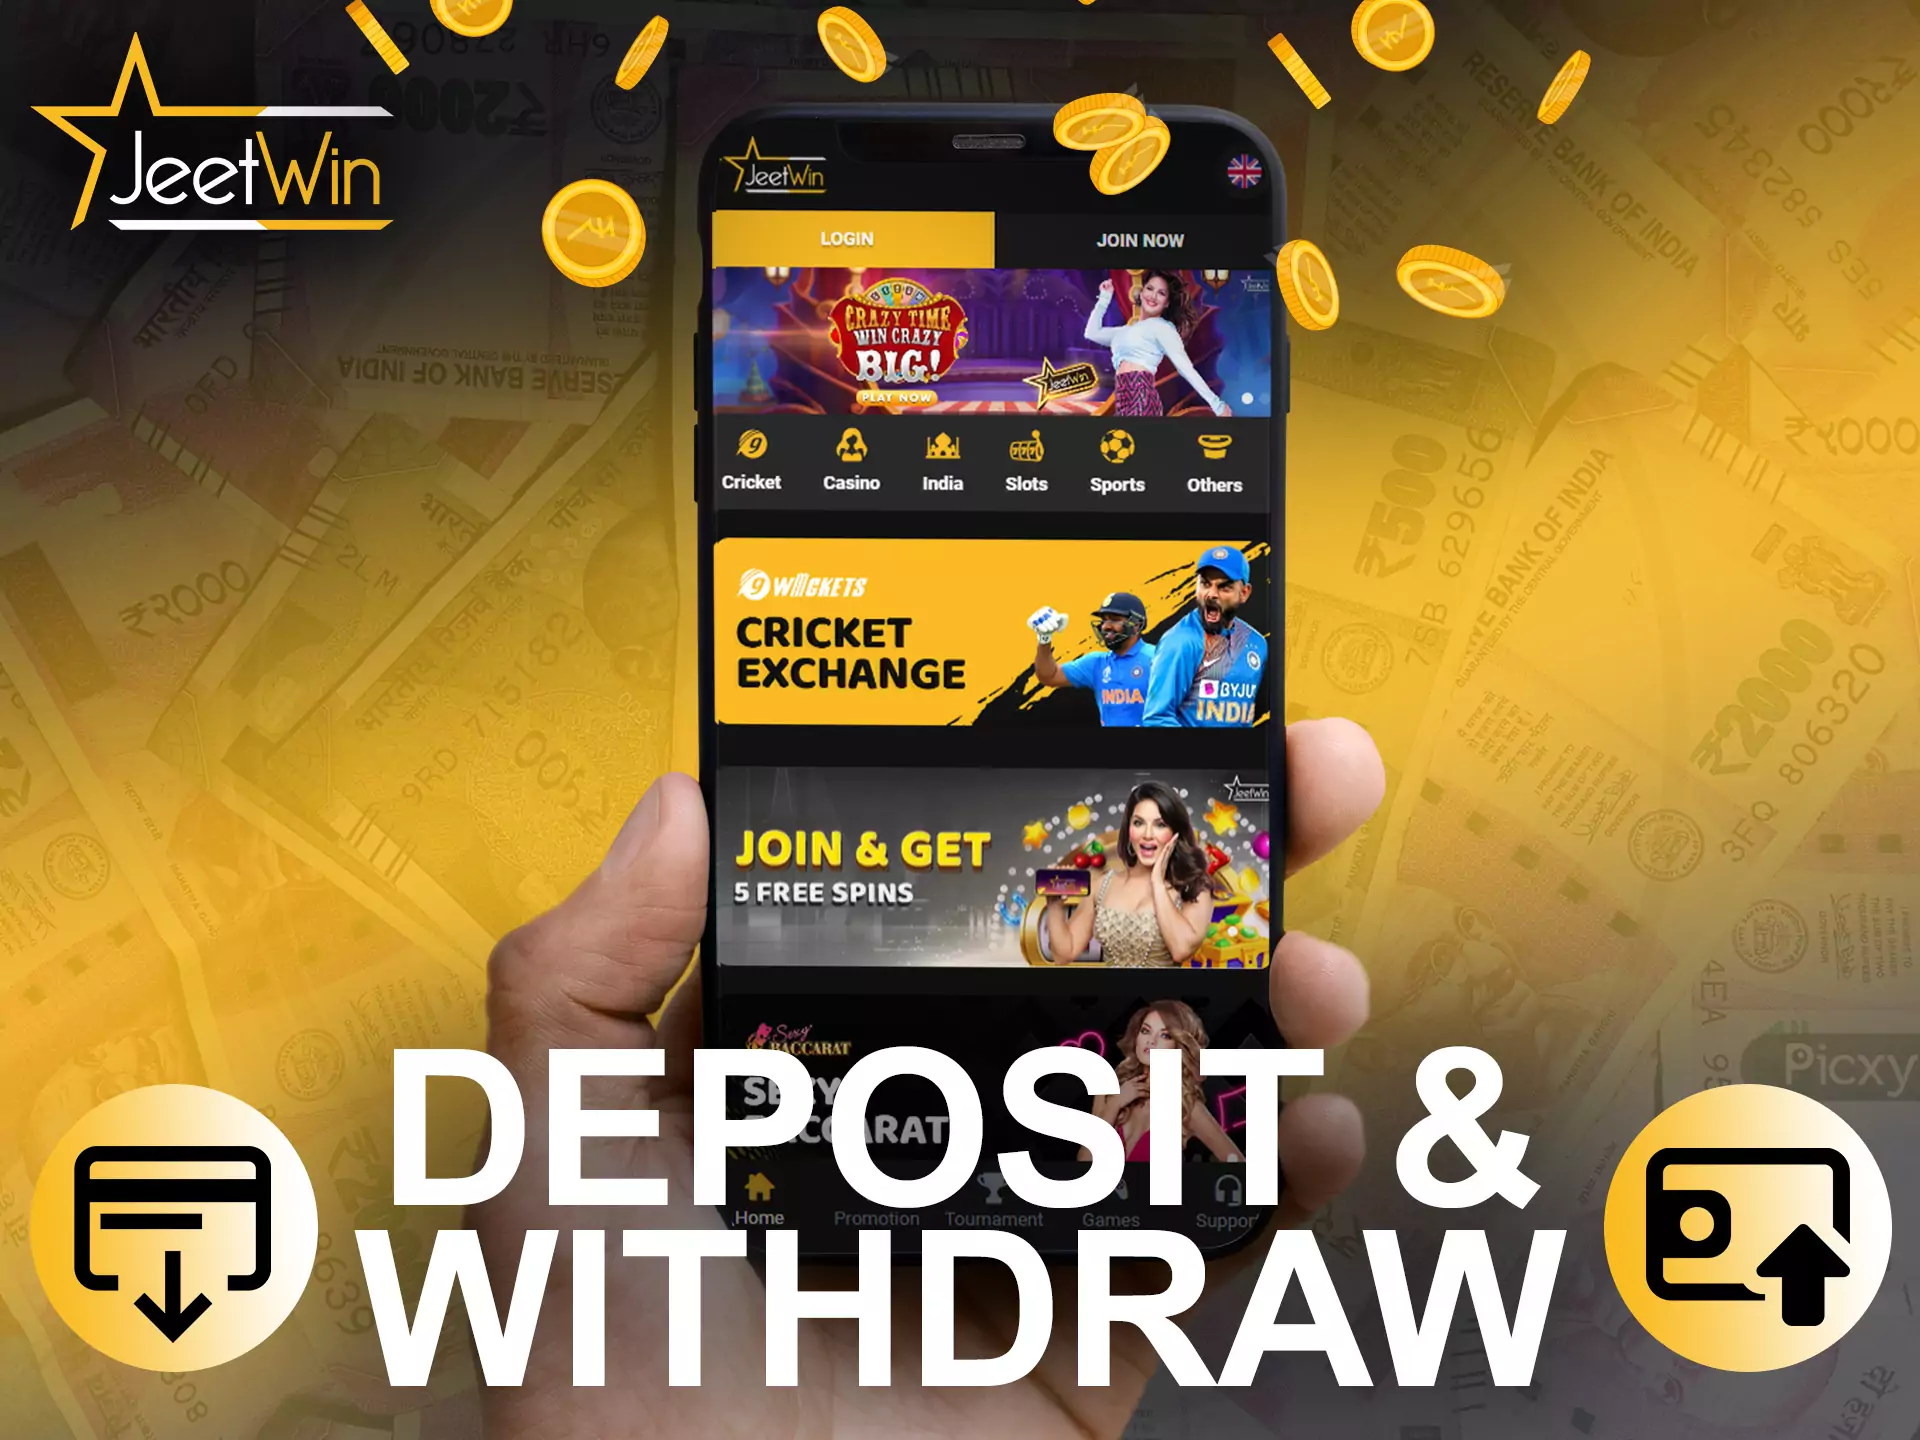 Learn how to deposit and withdraw money from JeetWin.